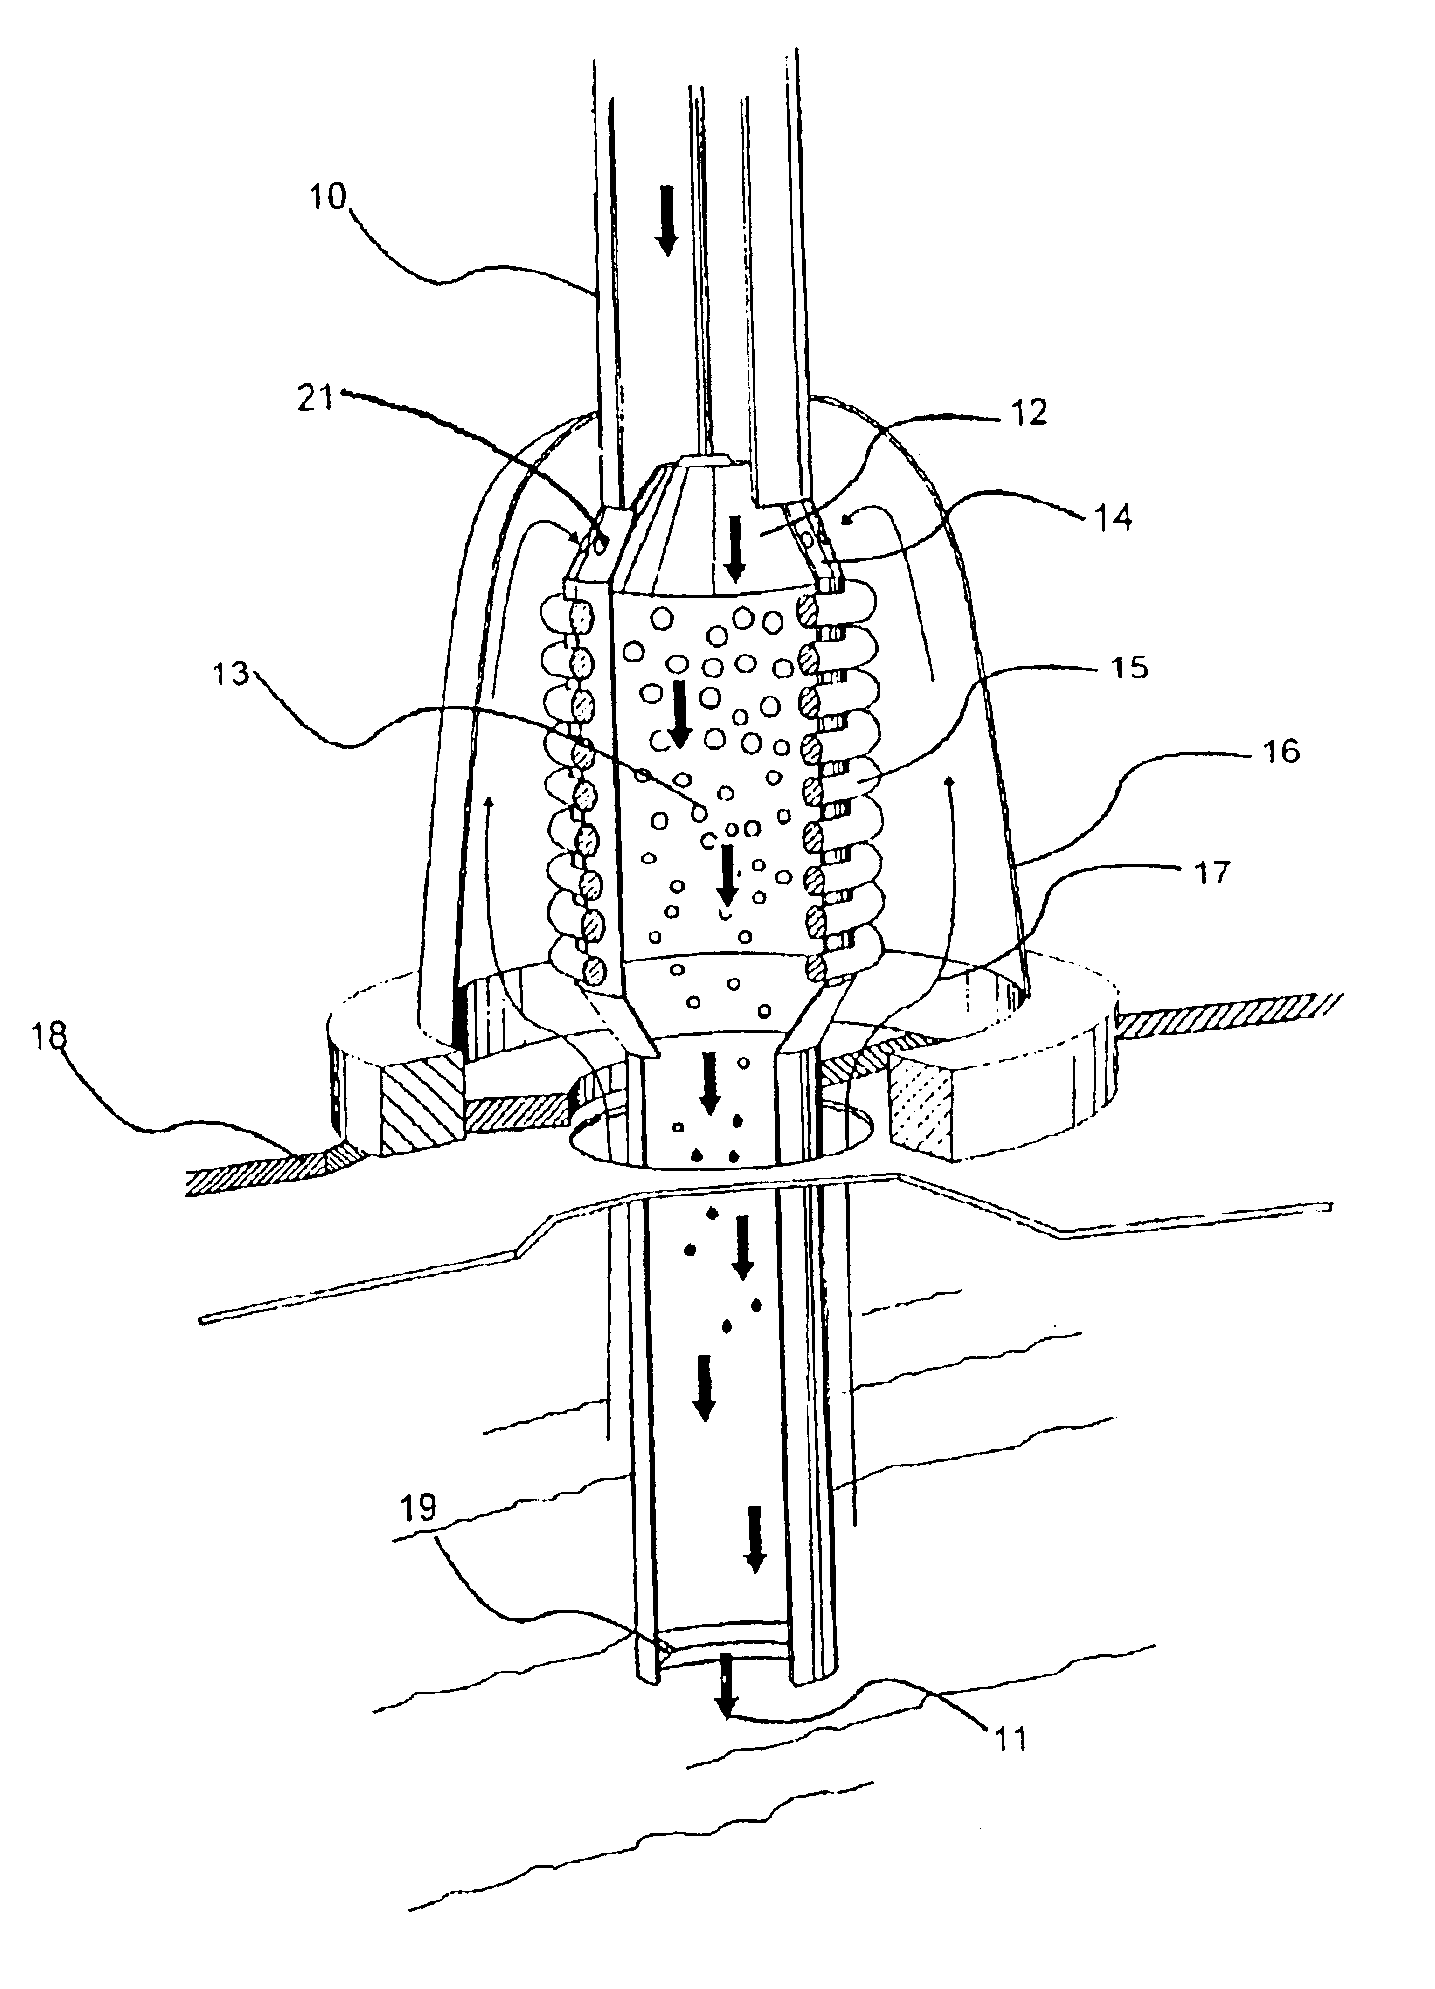 Method, apparatus and system for the condensation of vapors and gases